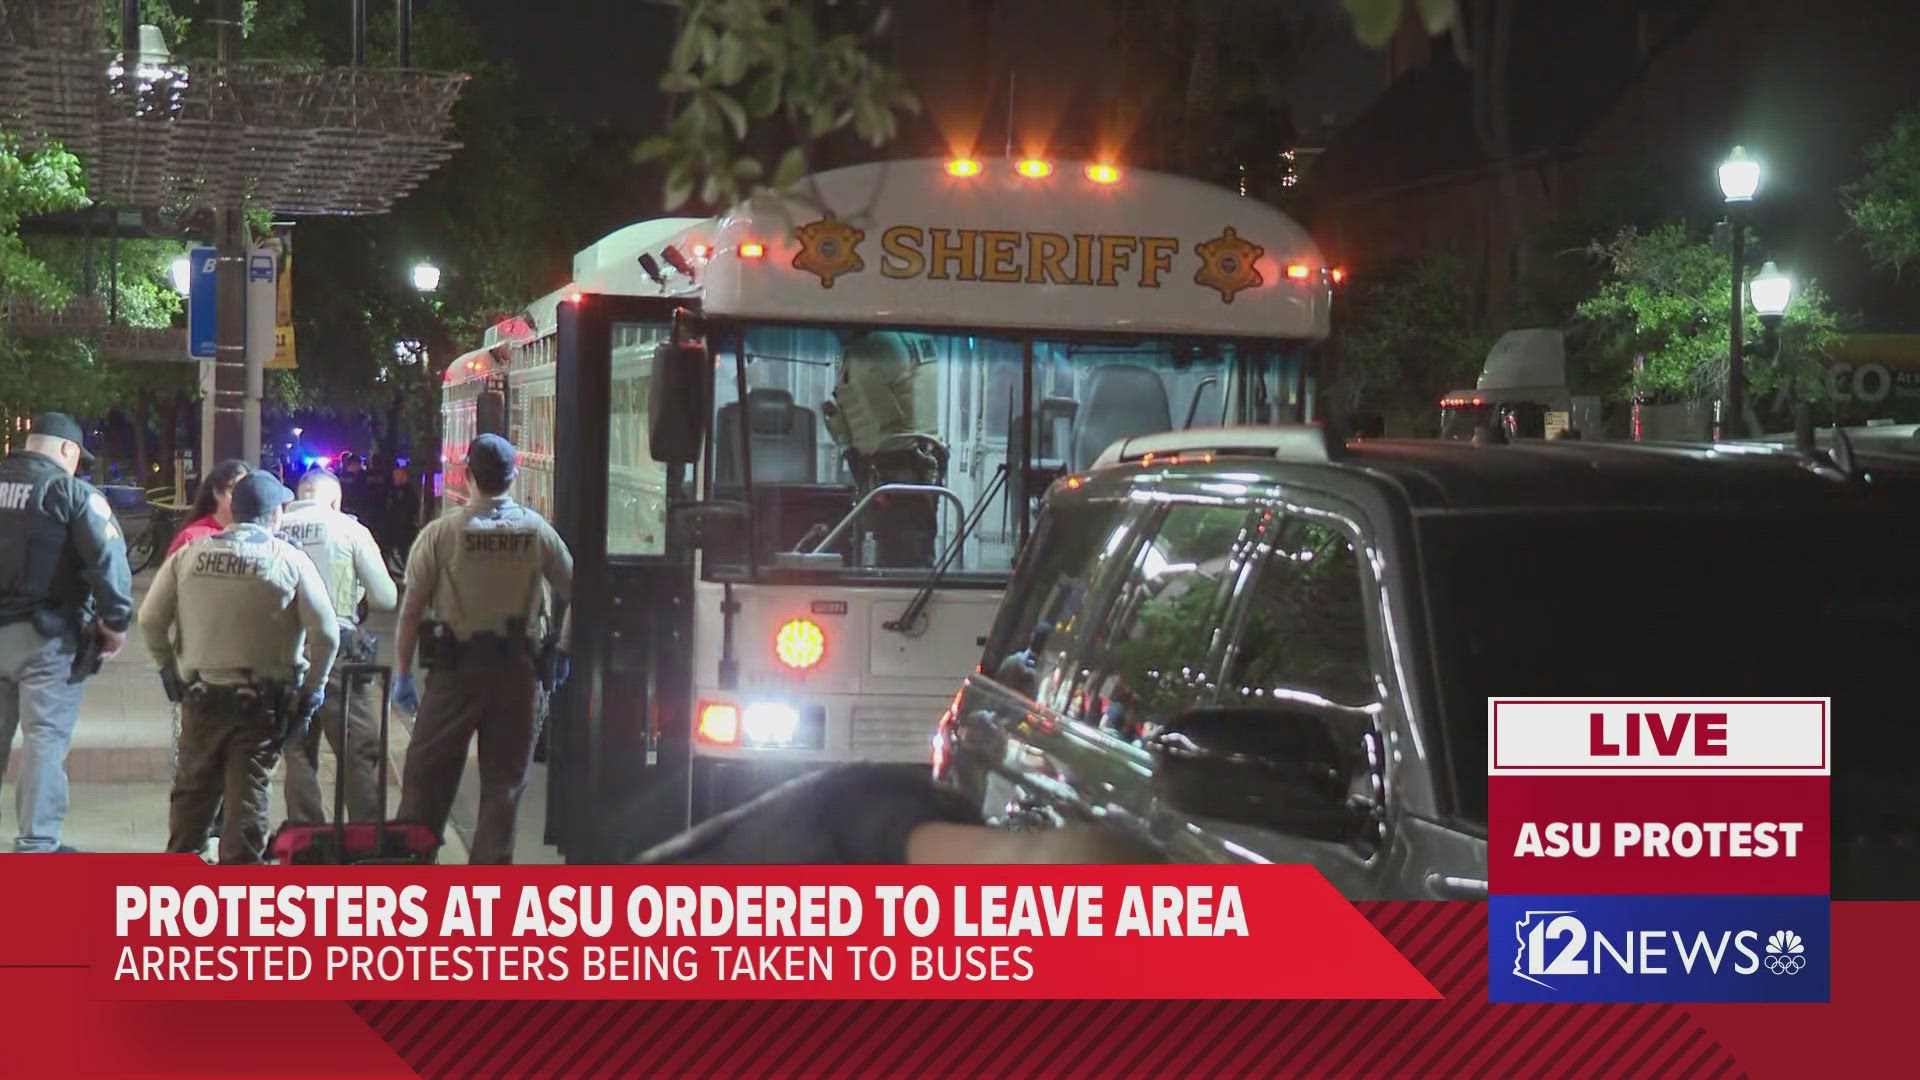 12News found out what happened after police took protesters into custody on ASU's Tempe campus on Saturday morning.